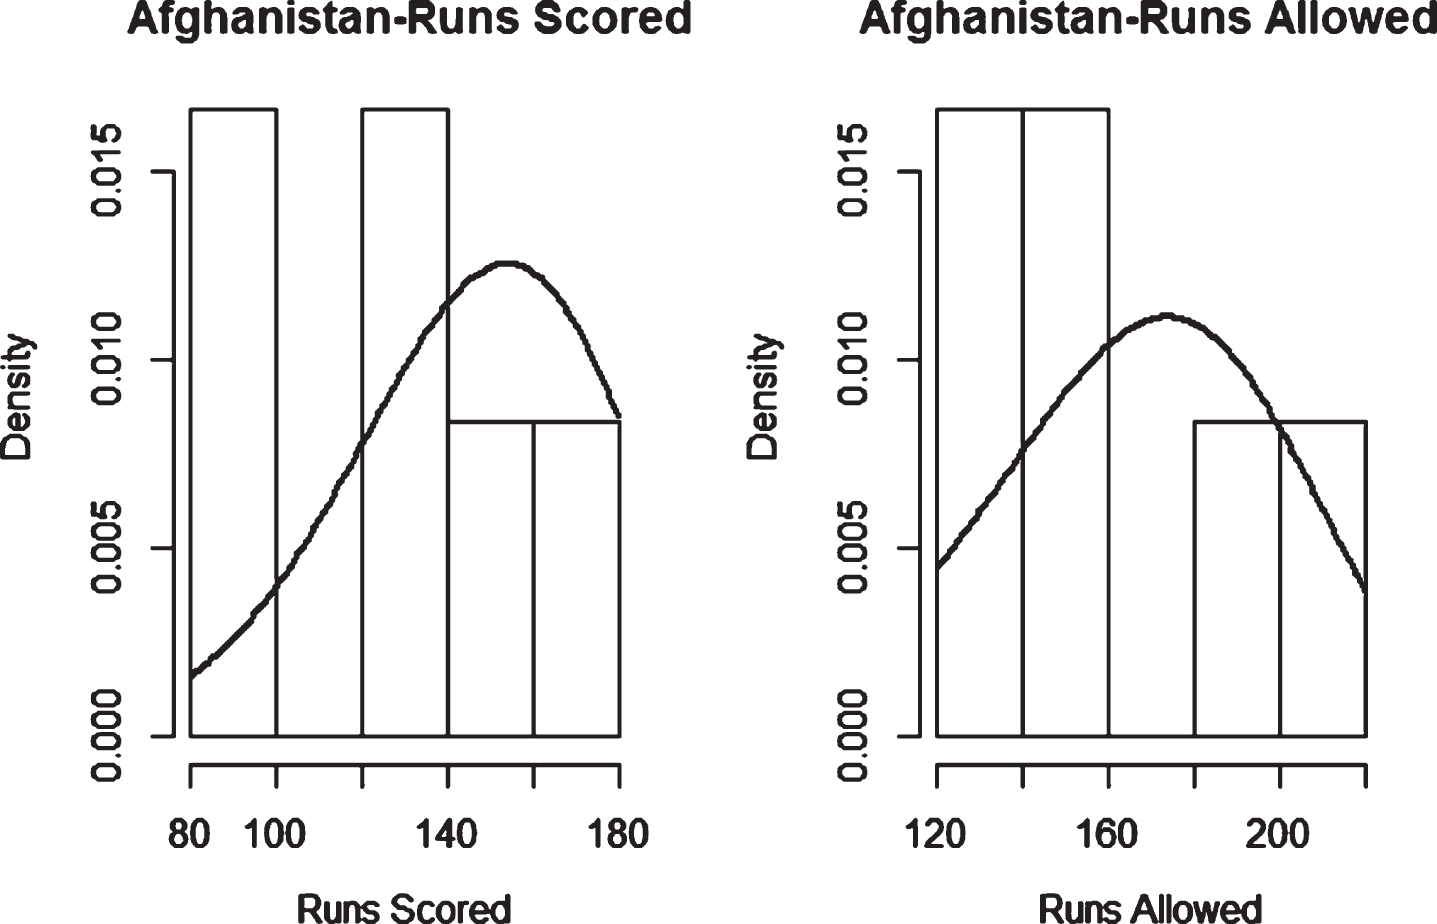 Weibull Distribution Fit for Runs Scored and Runs Allowed for Afghanistan using Least Squares Method (Twenty20).